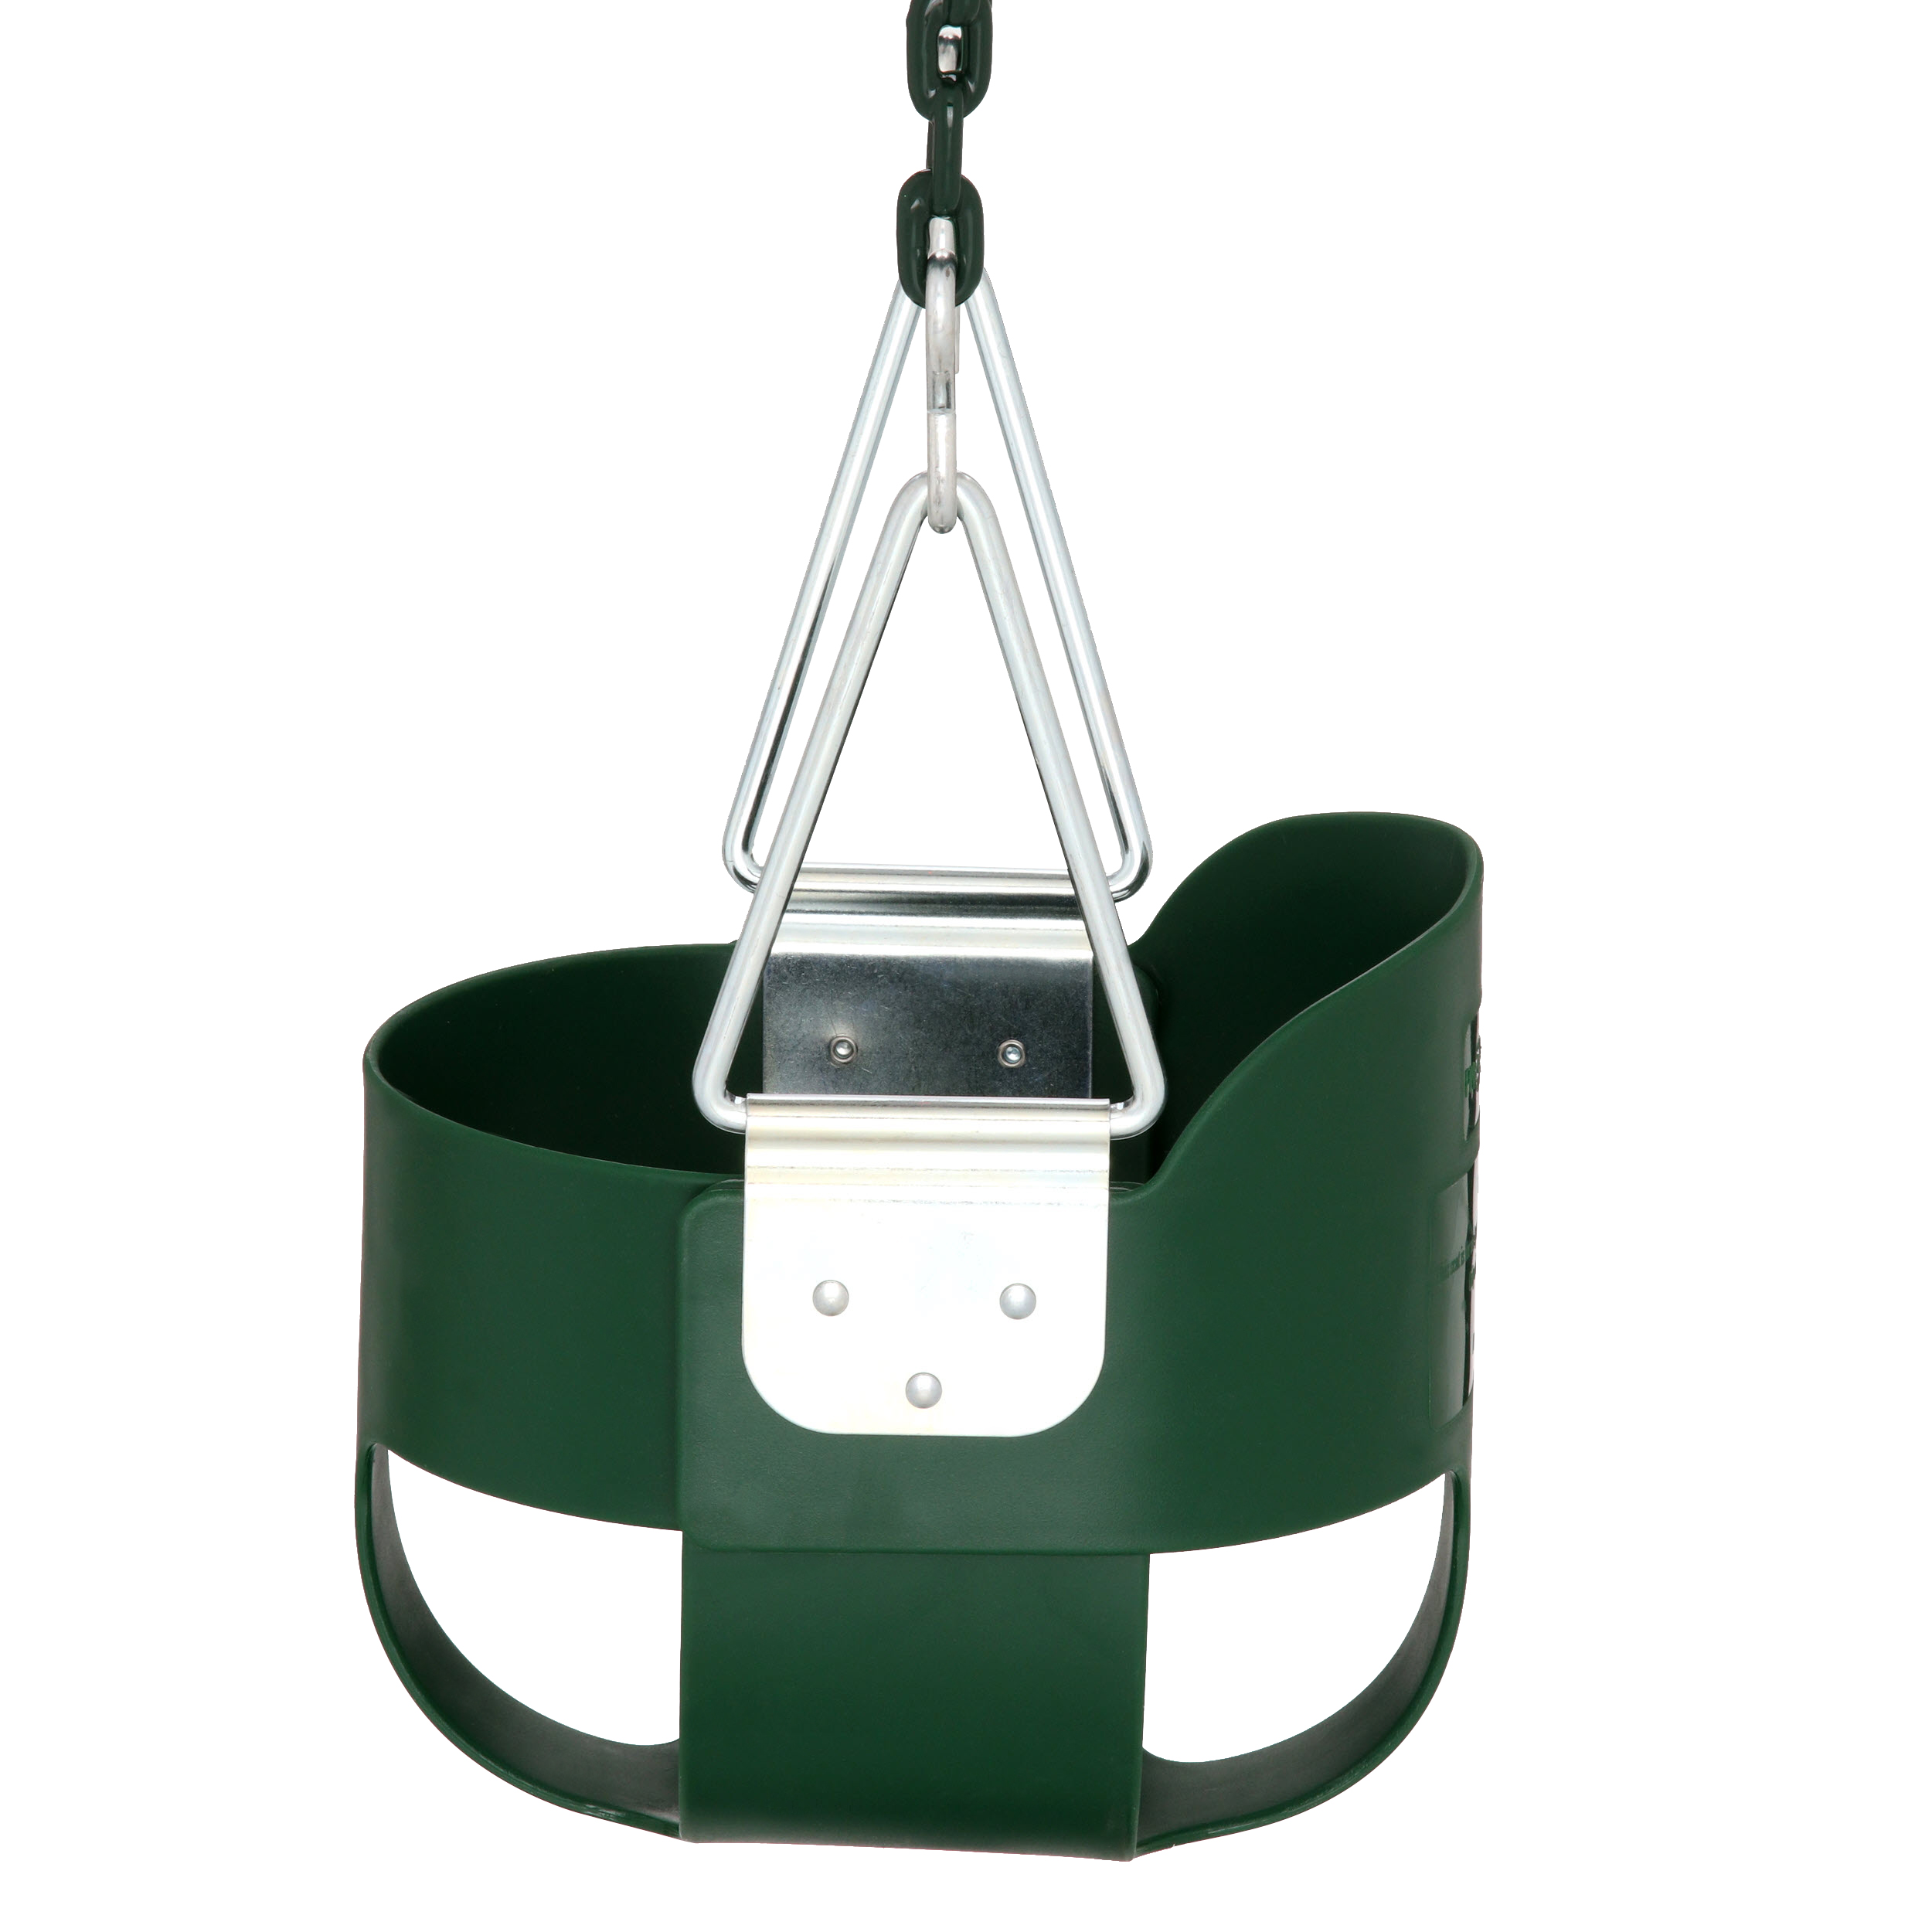 Gorilla Playsets Full Bucket Toddler Swing - Green with Green Chains - image 4 of 7